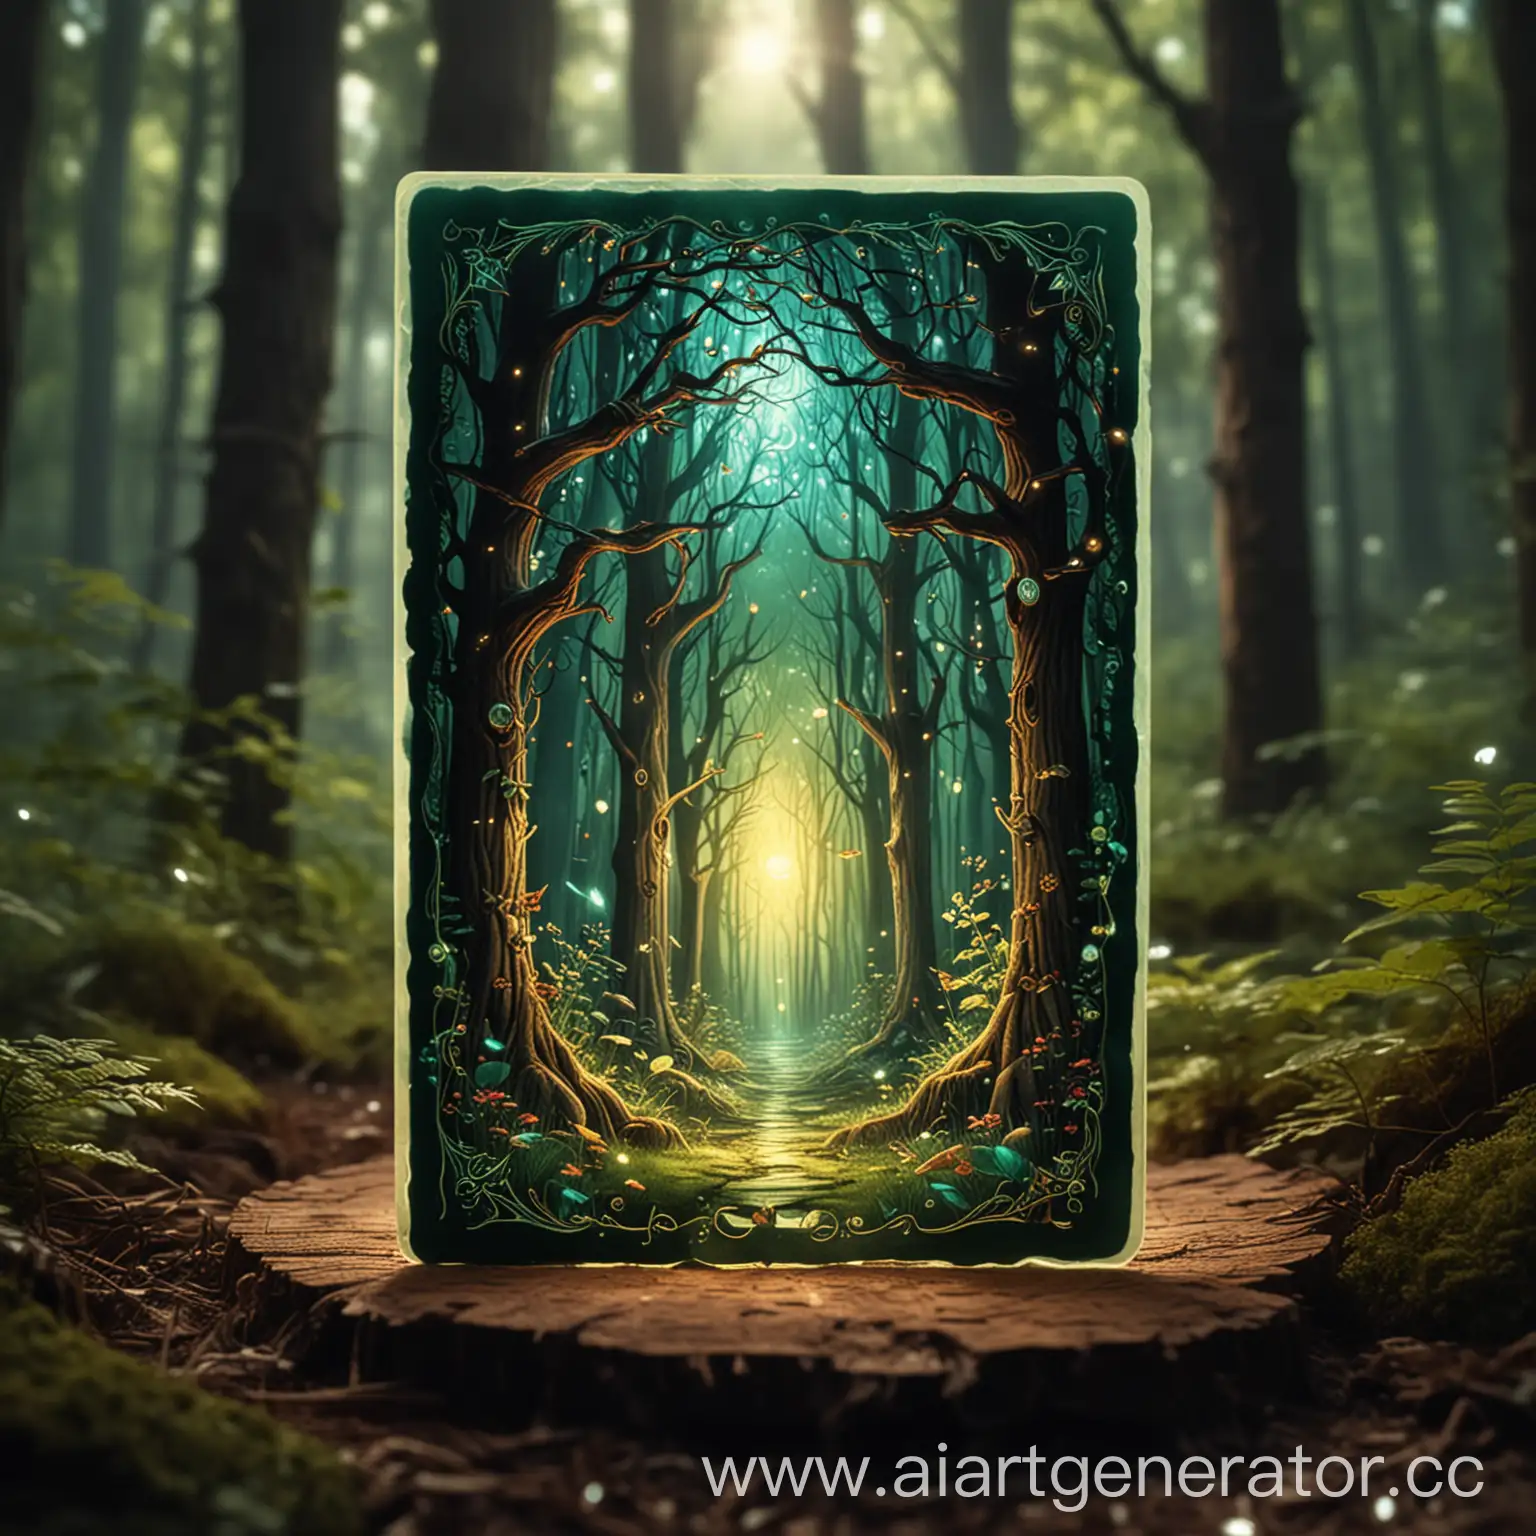 Enchanted-Glowing-Card-in-Magical-Forest